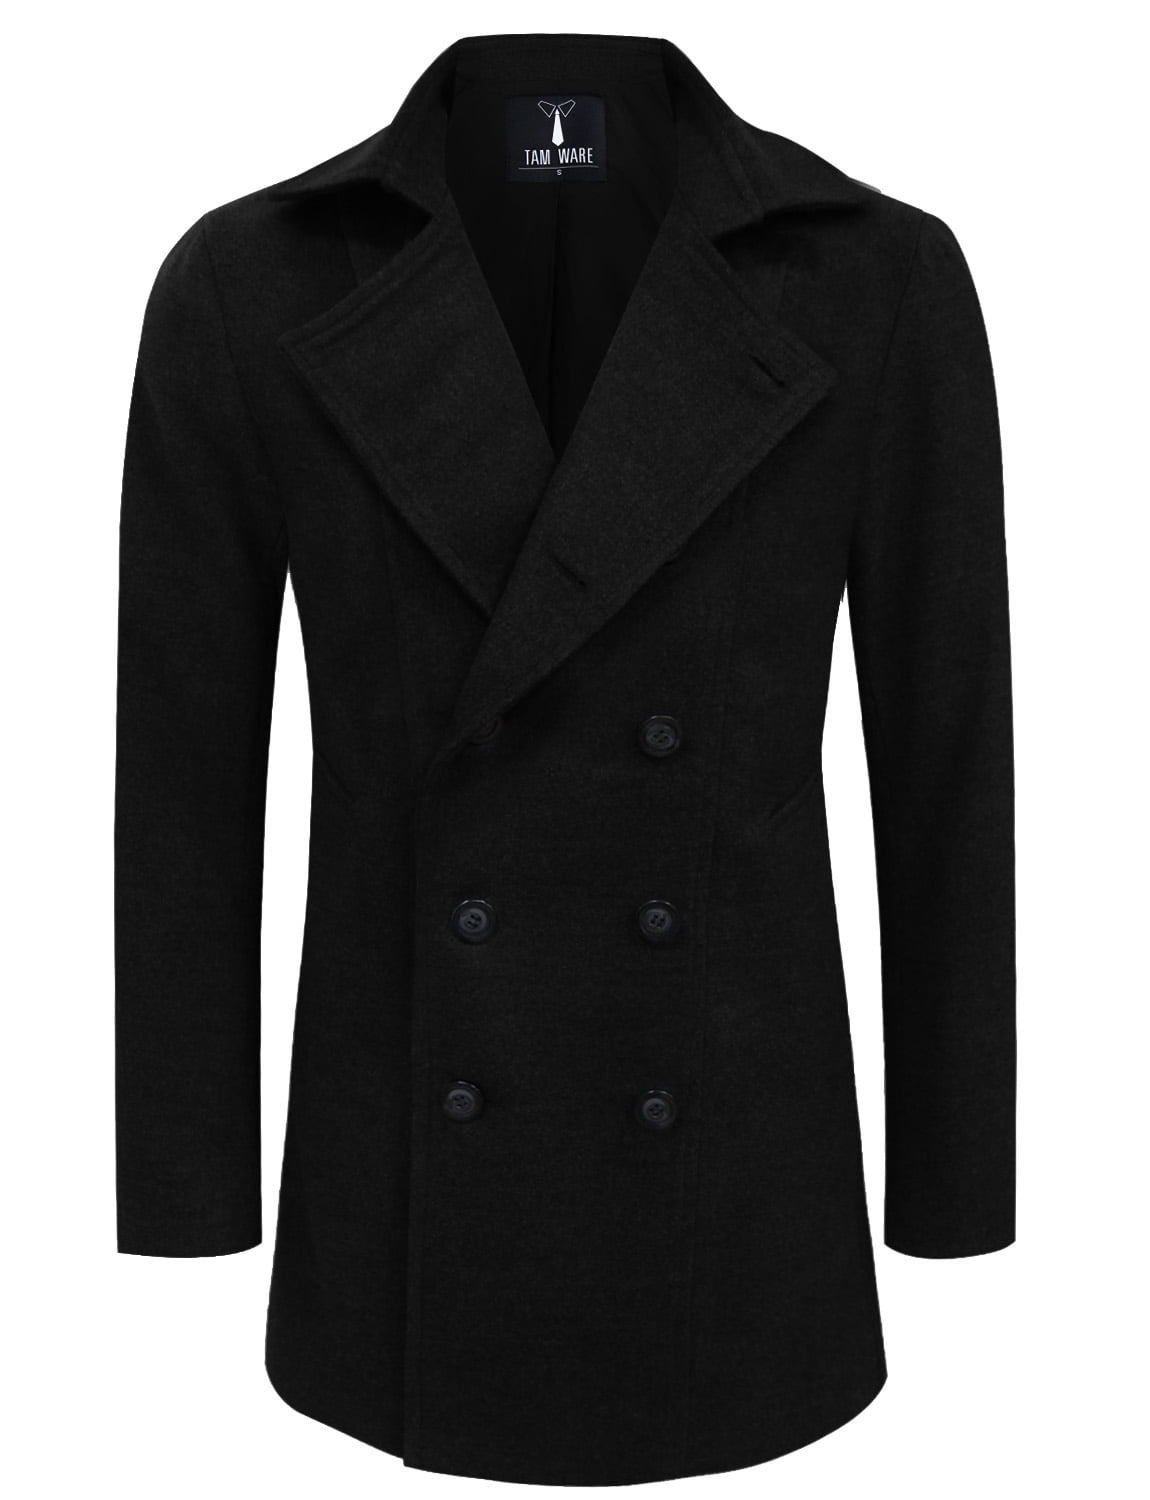 TAM WARE Mens Stylish Double Breasted with Belt Pea Coat - Walmart.com